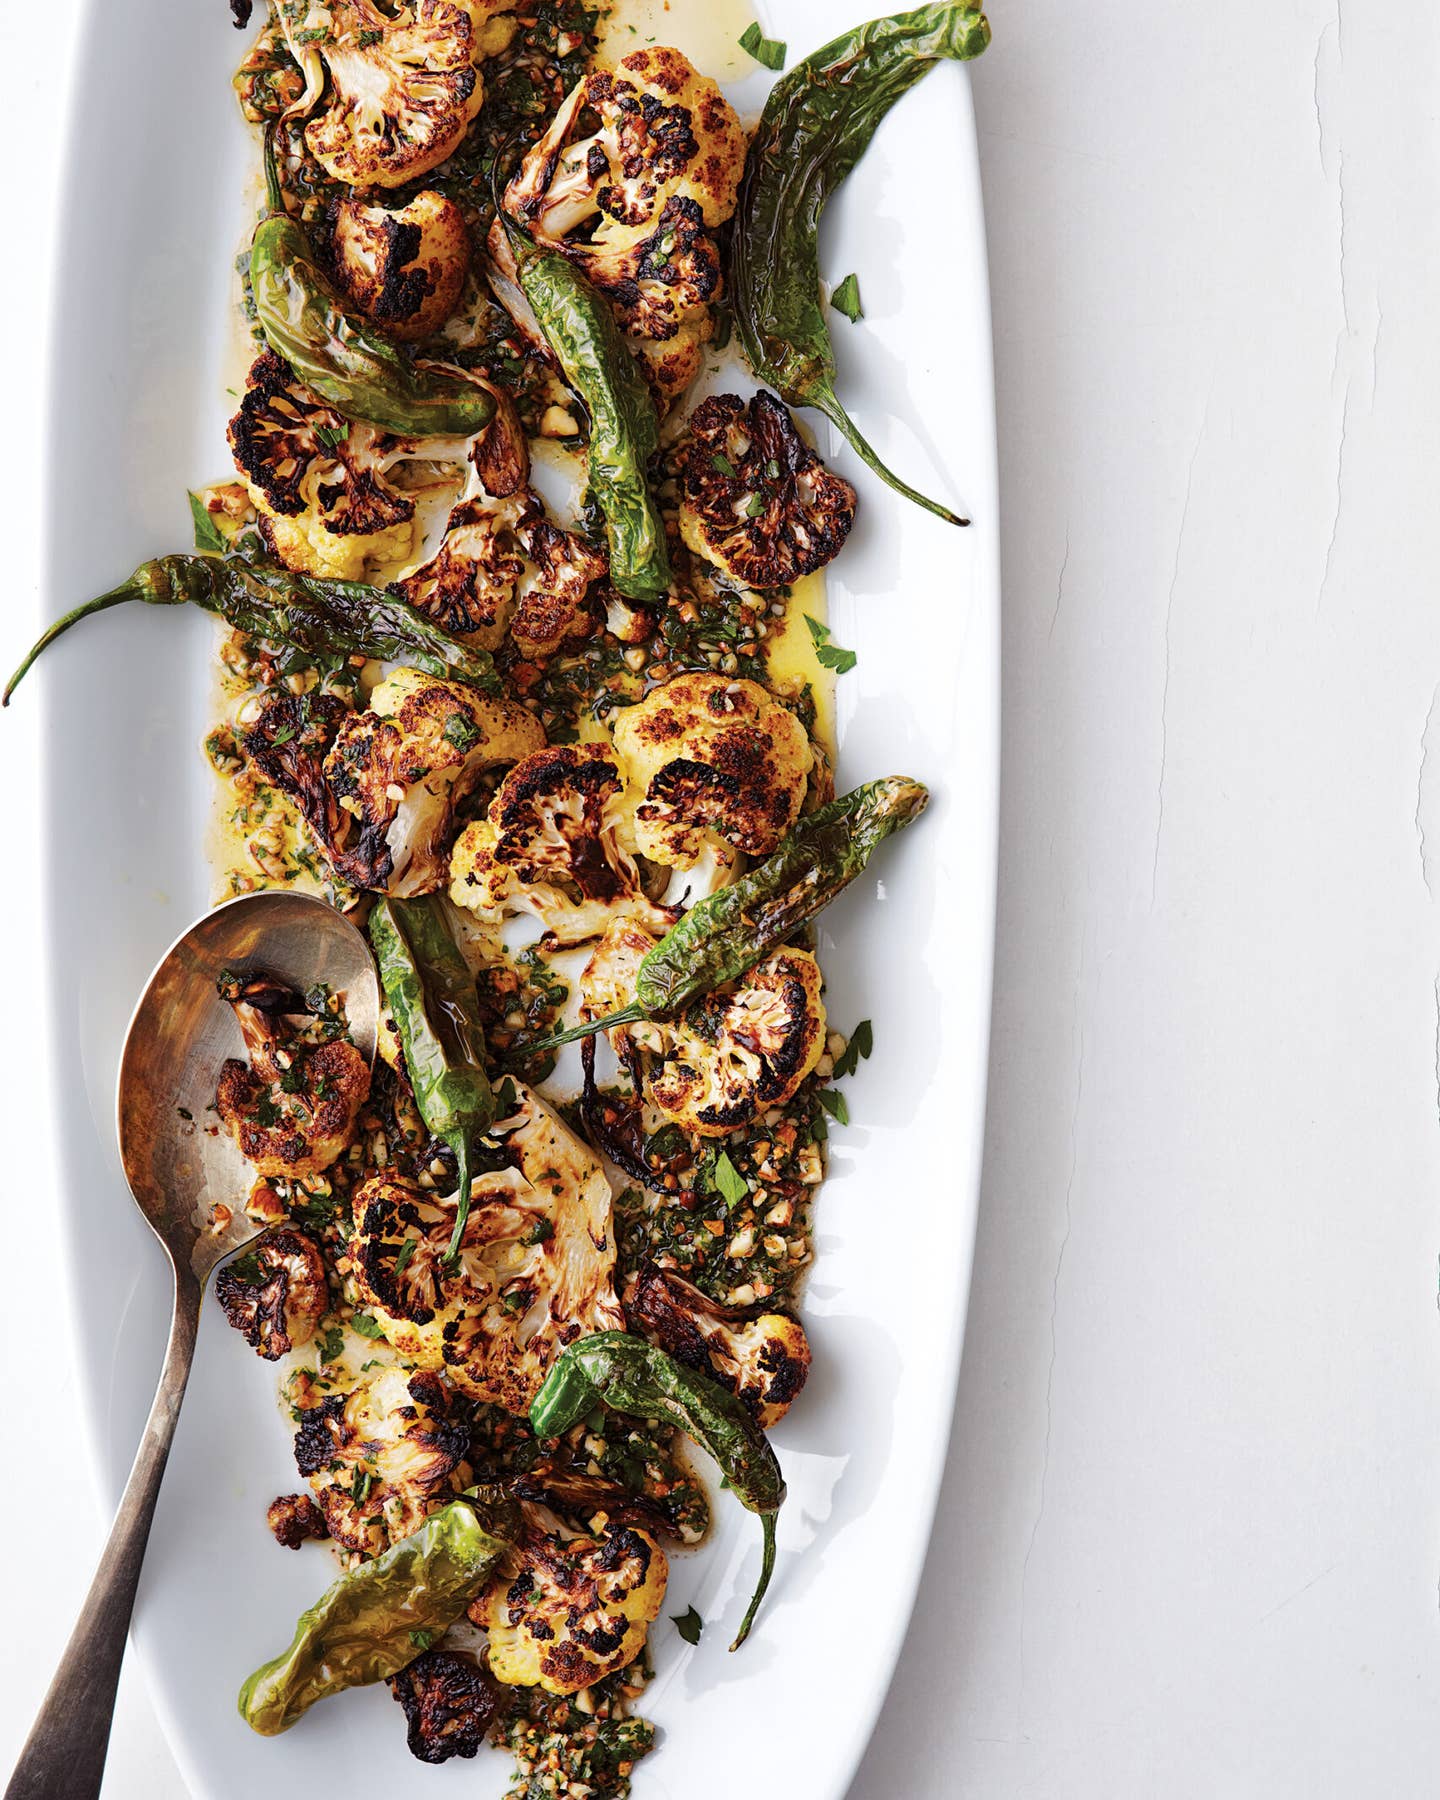 Charred Cauliflower and Shishito Peppers with Picada Sauce